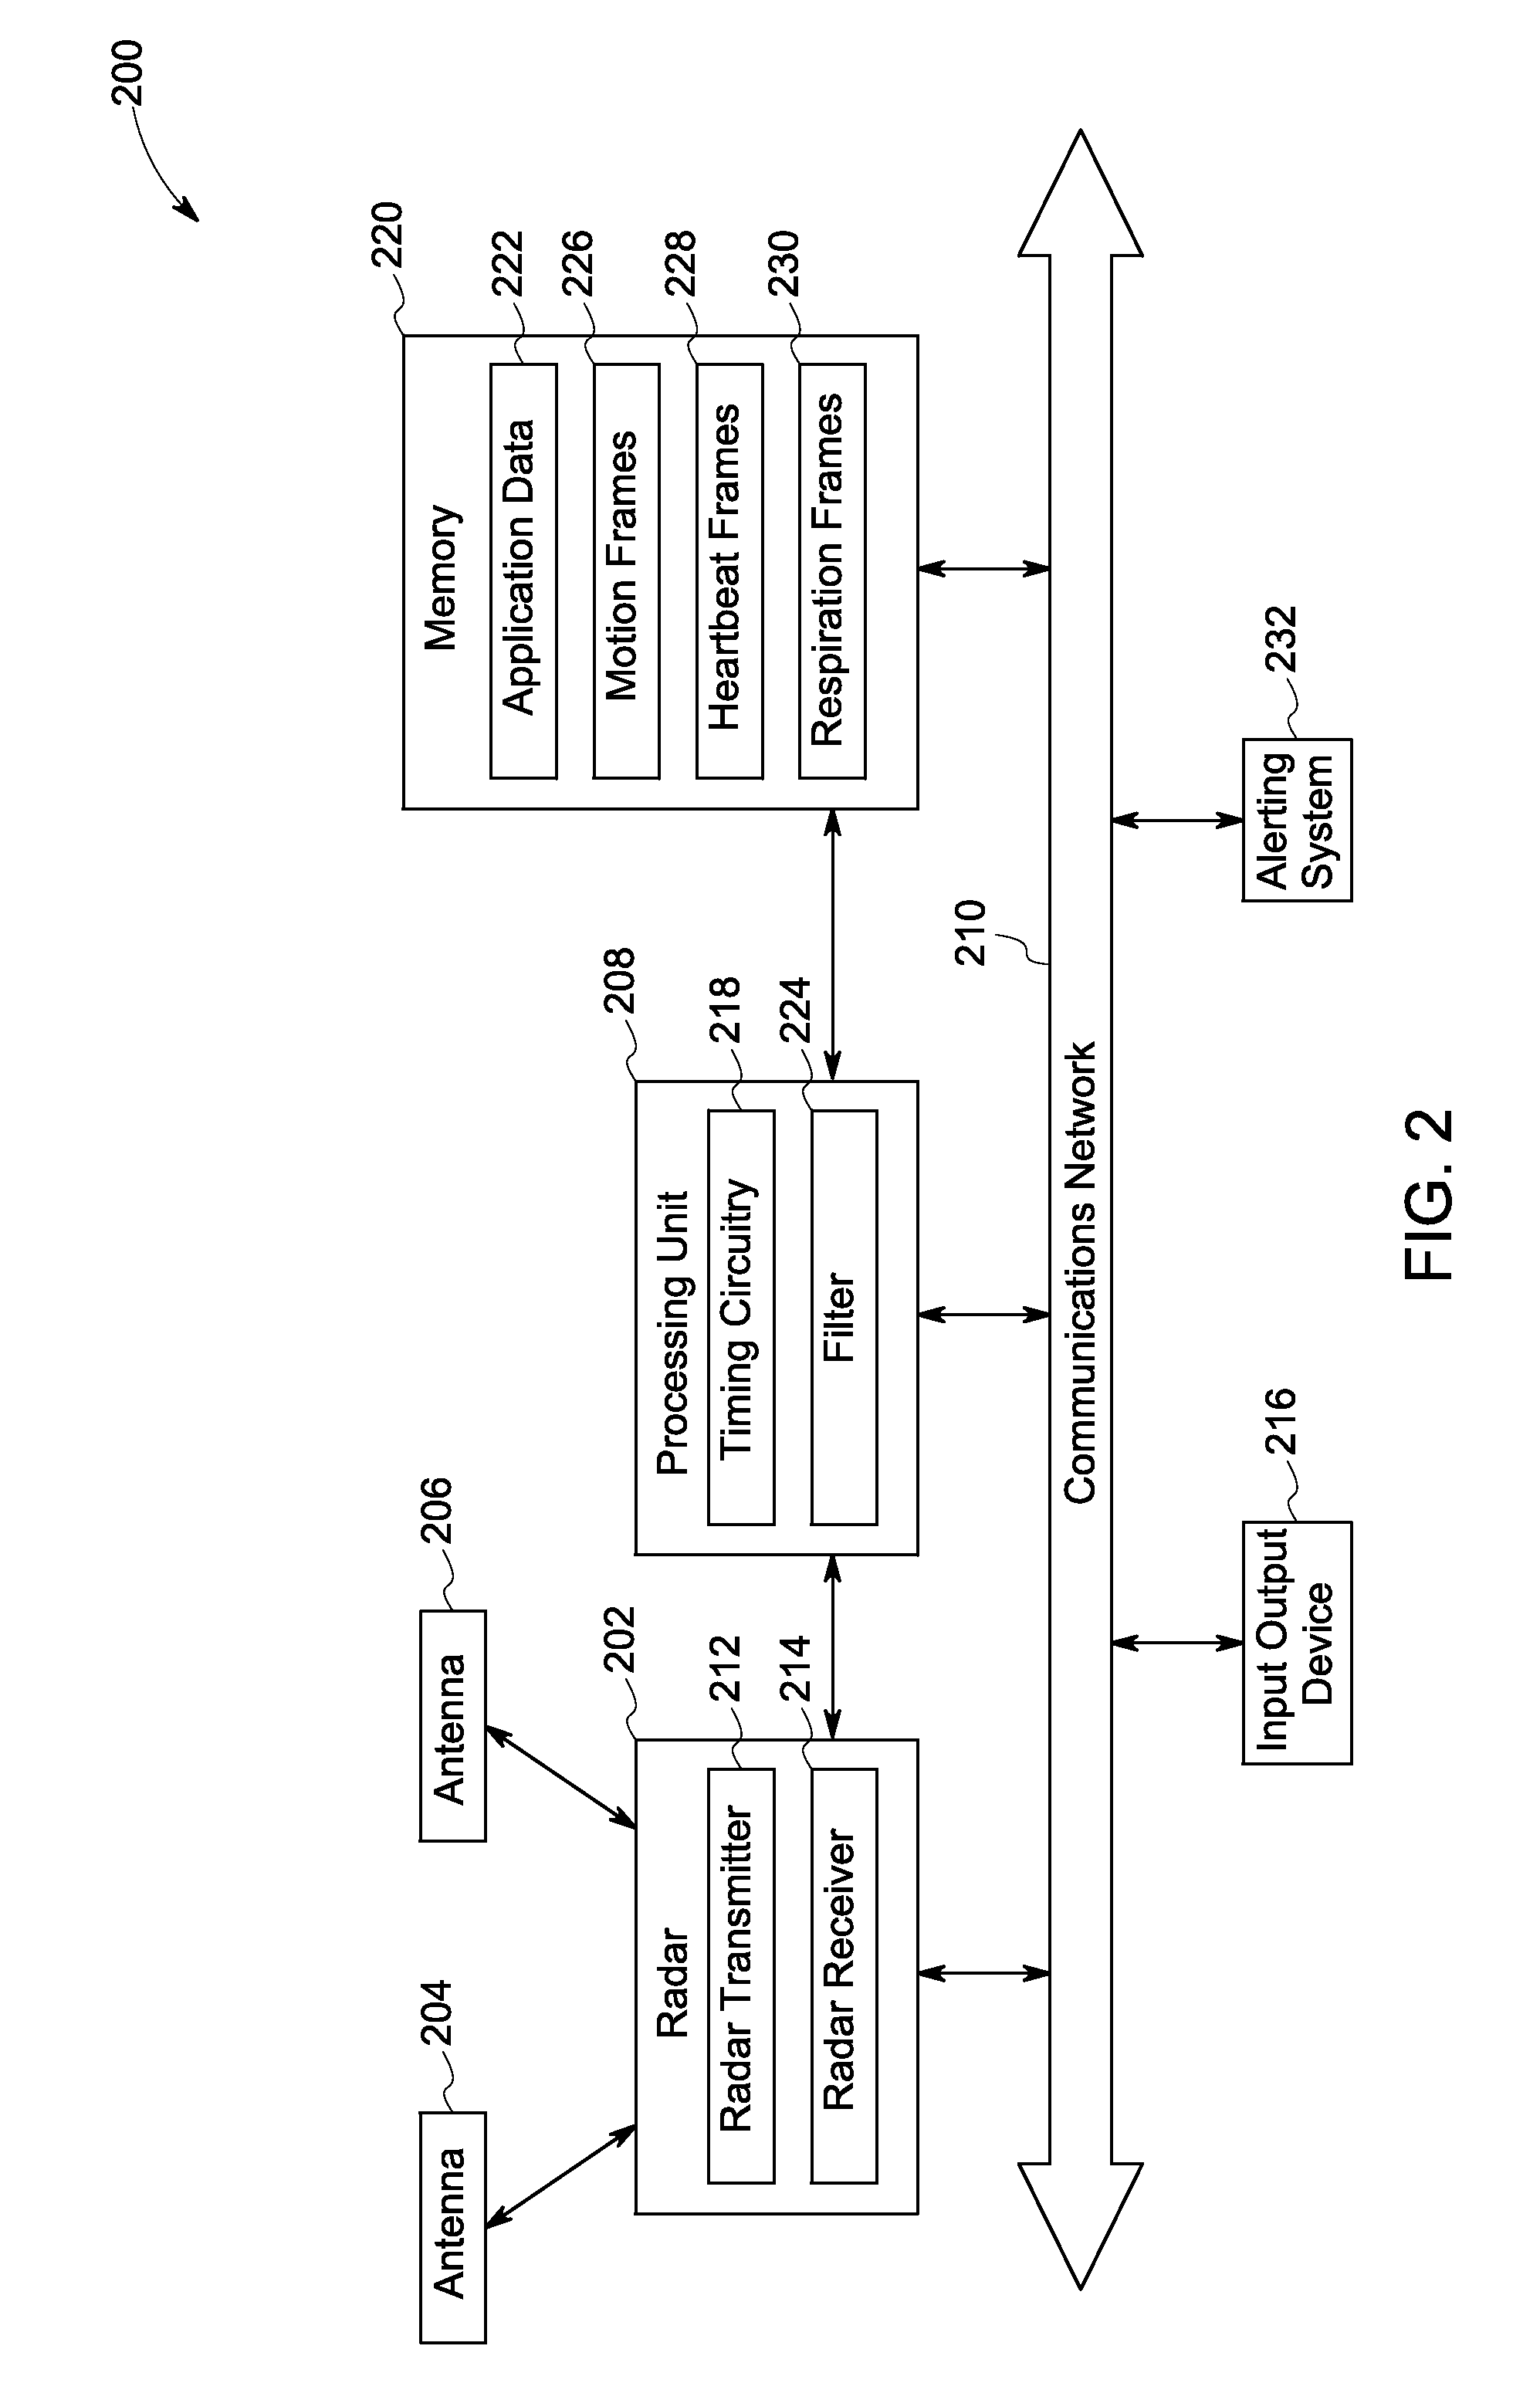 Radar based systems and methods for detecting a fallen person